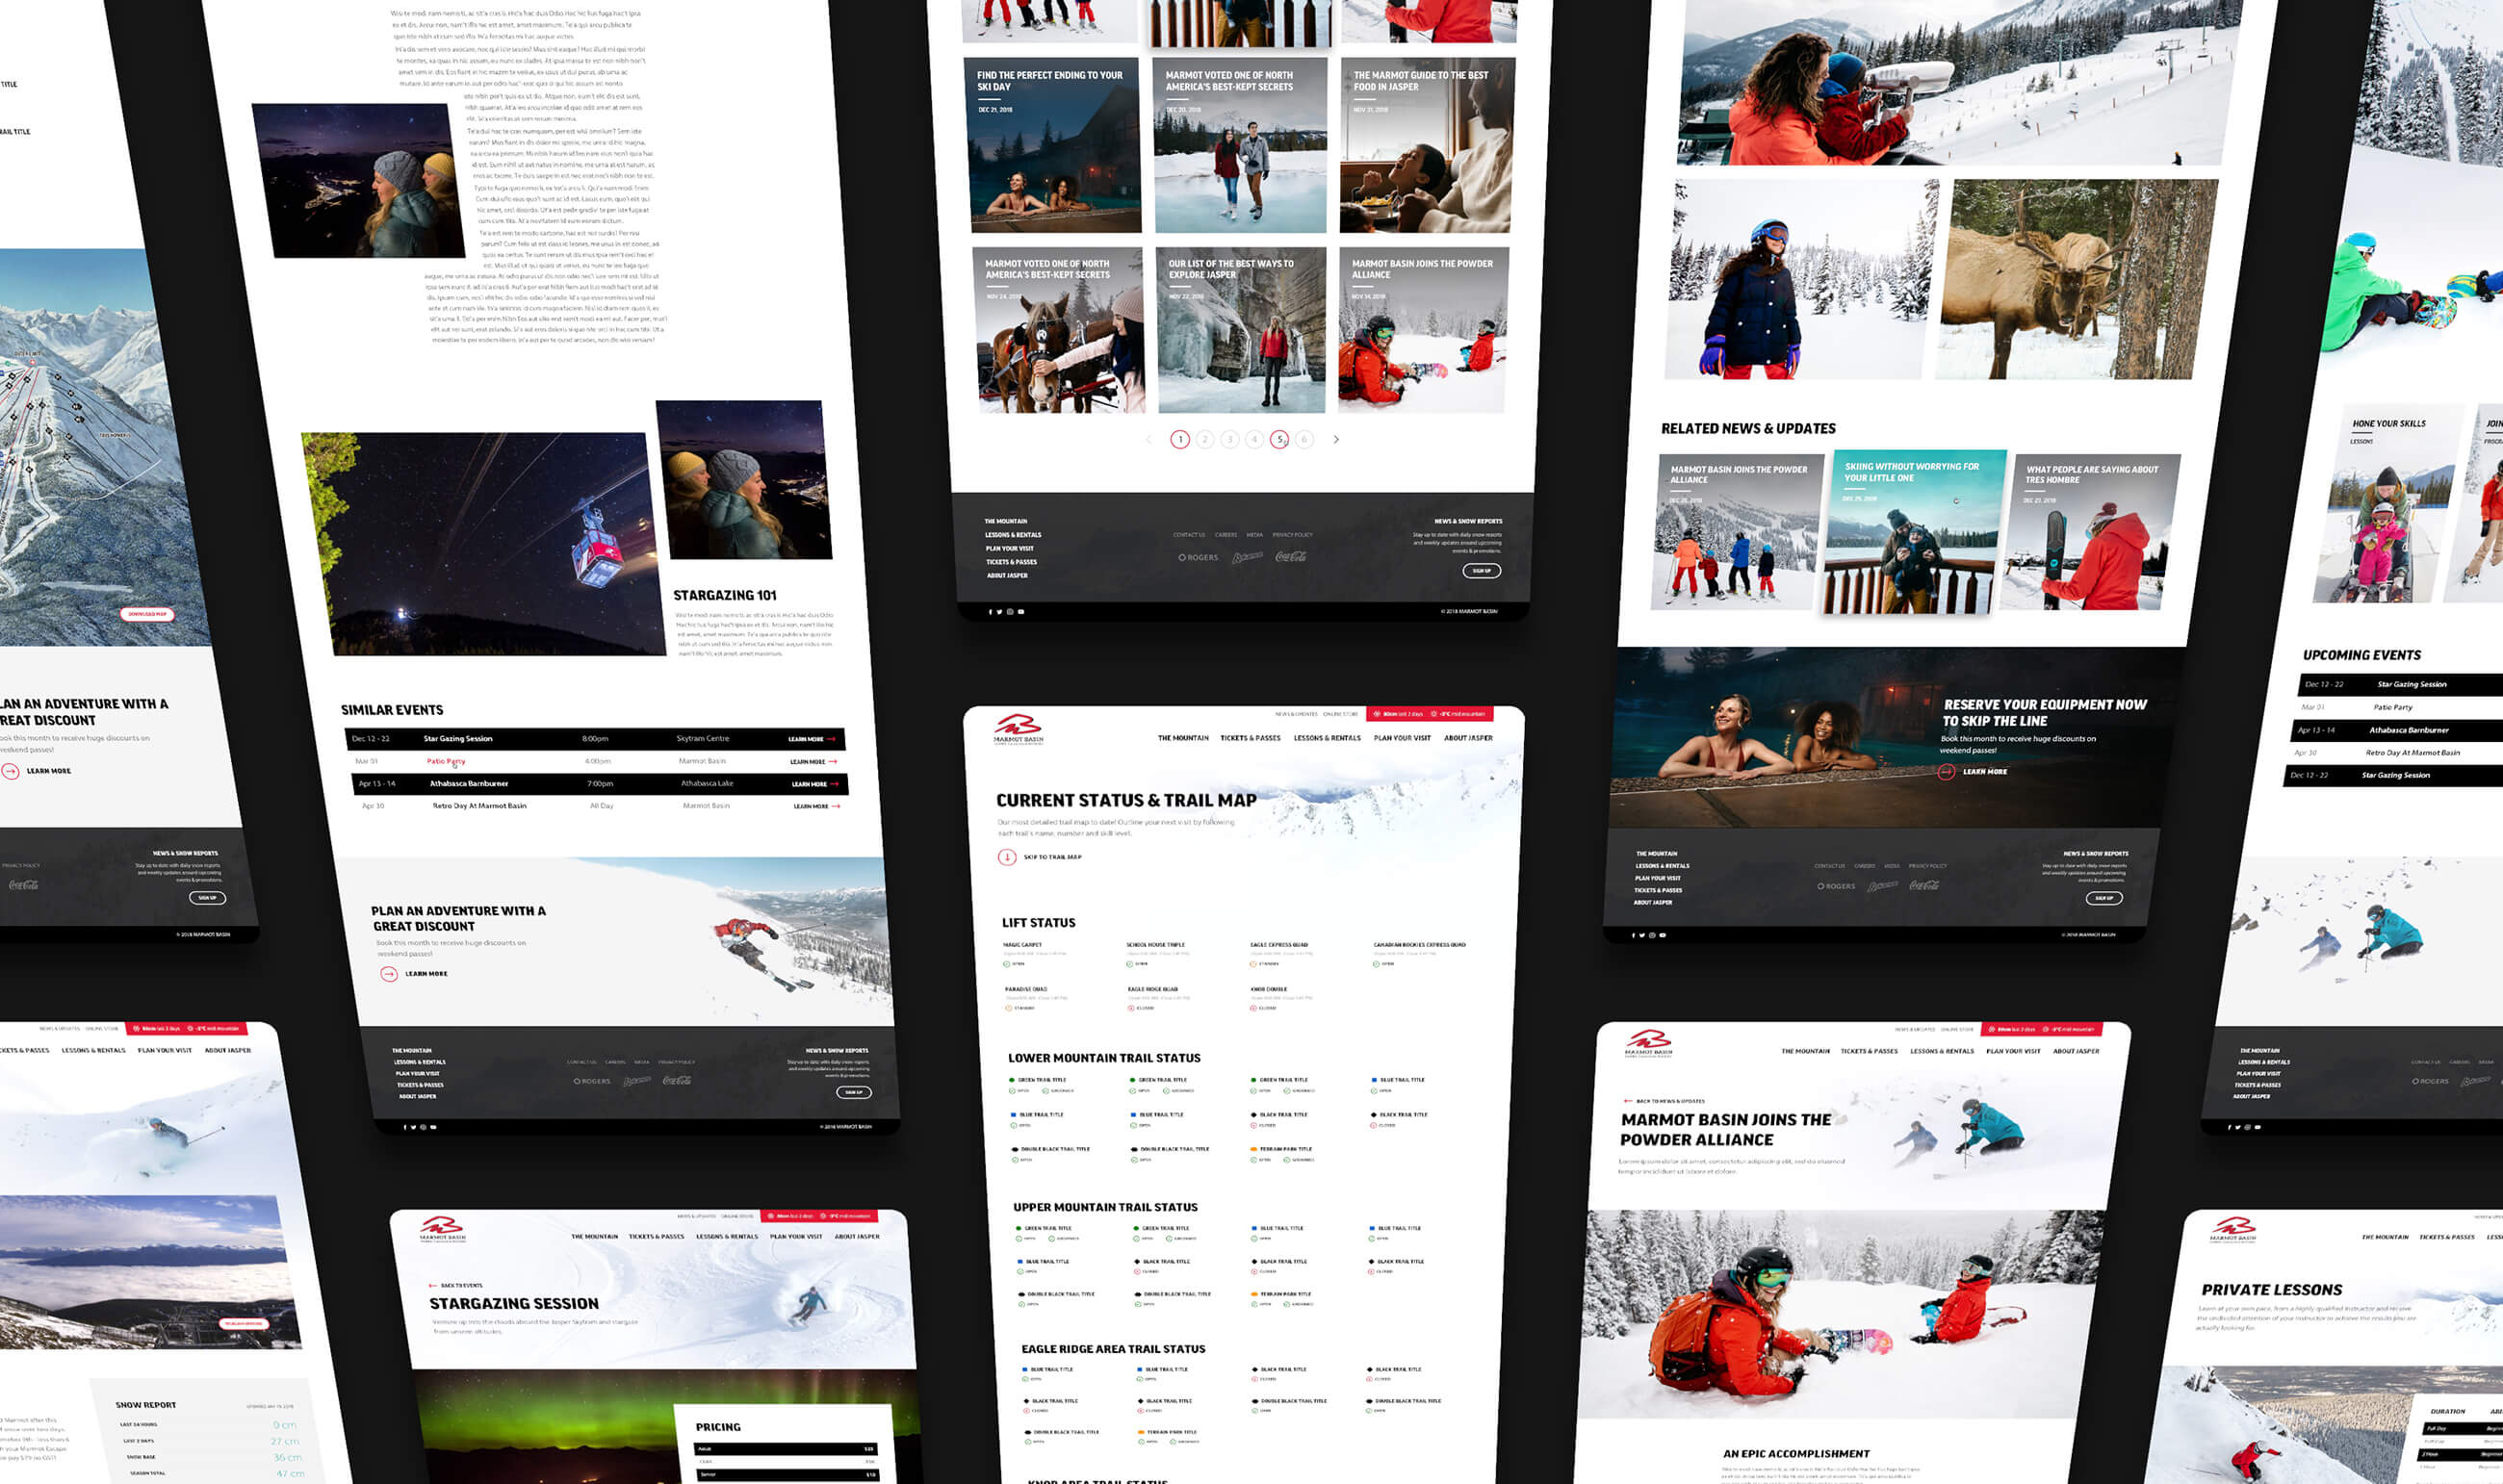 Grid of screenshots from various pages of the Marmot Basin website